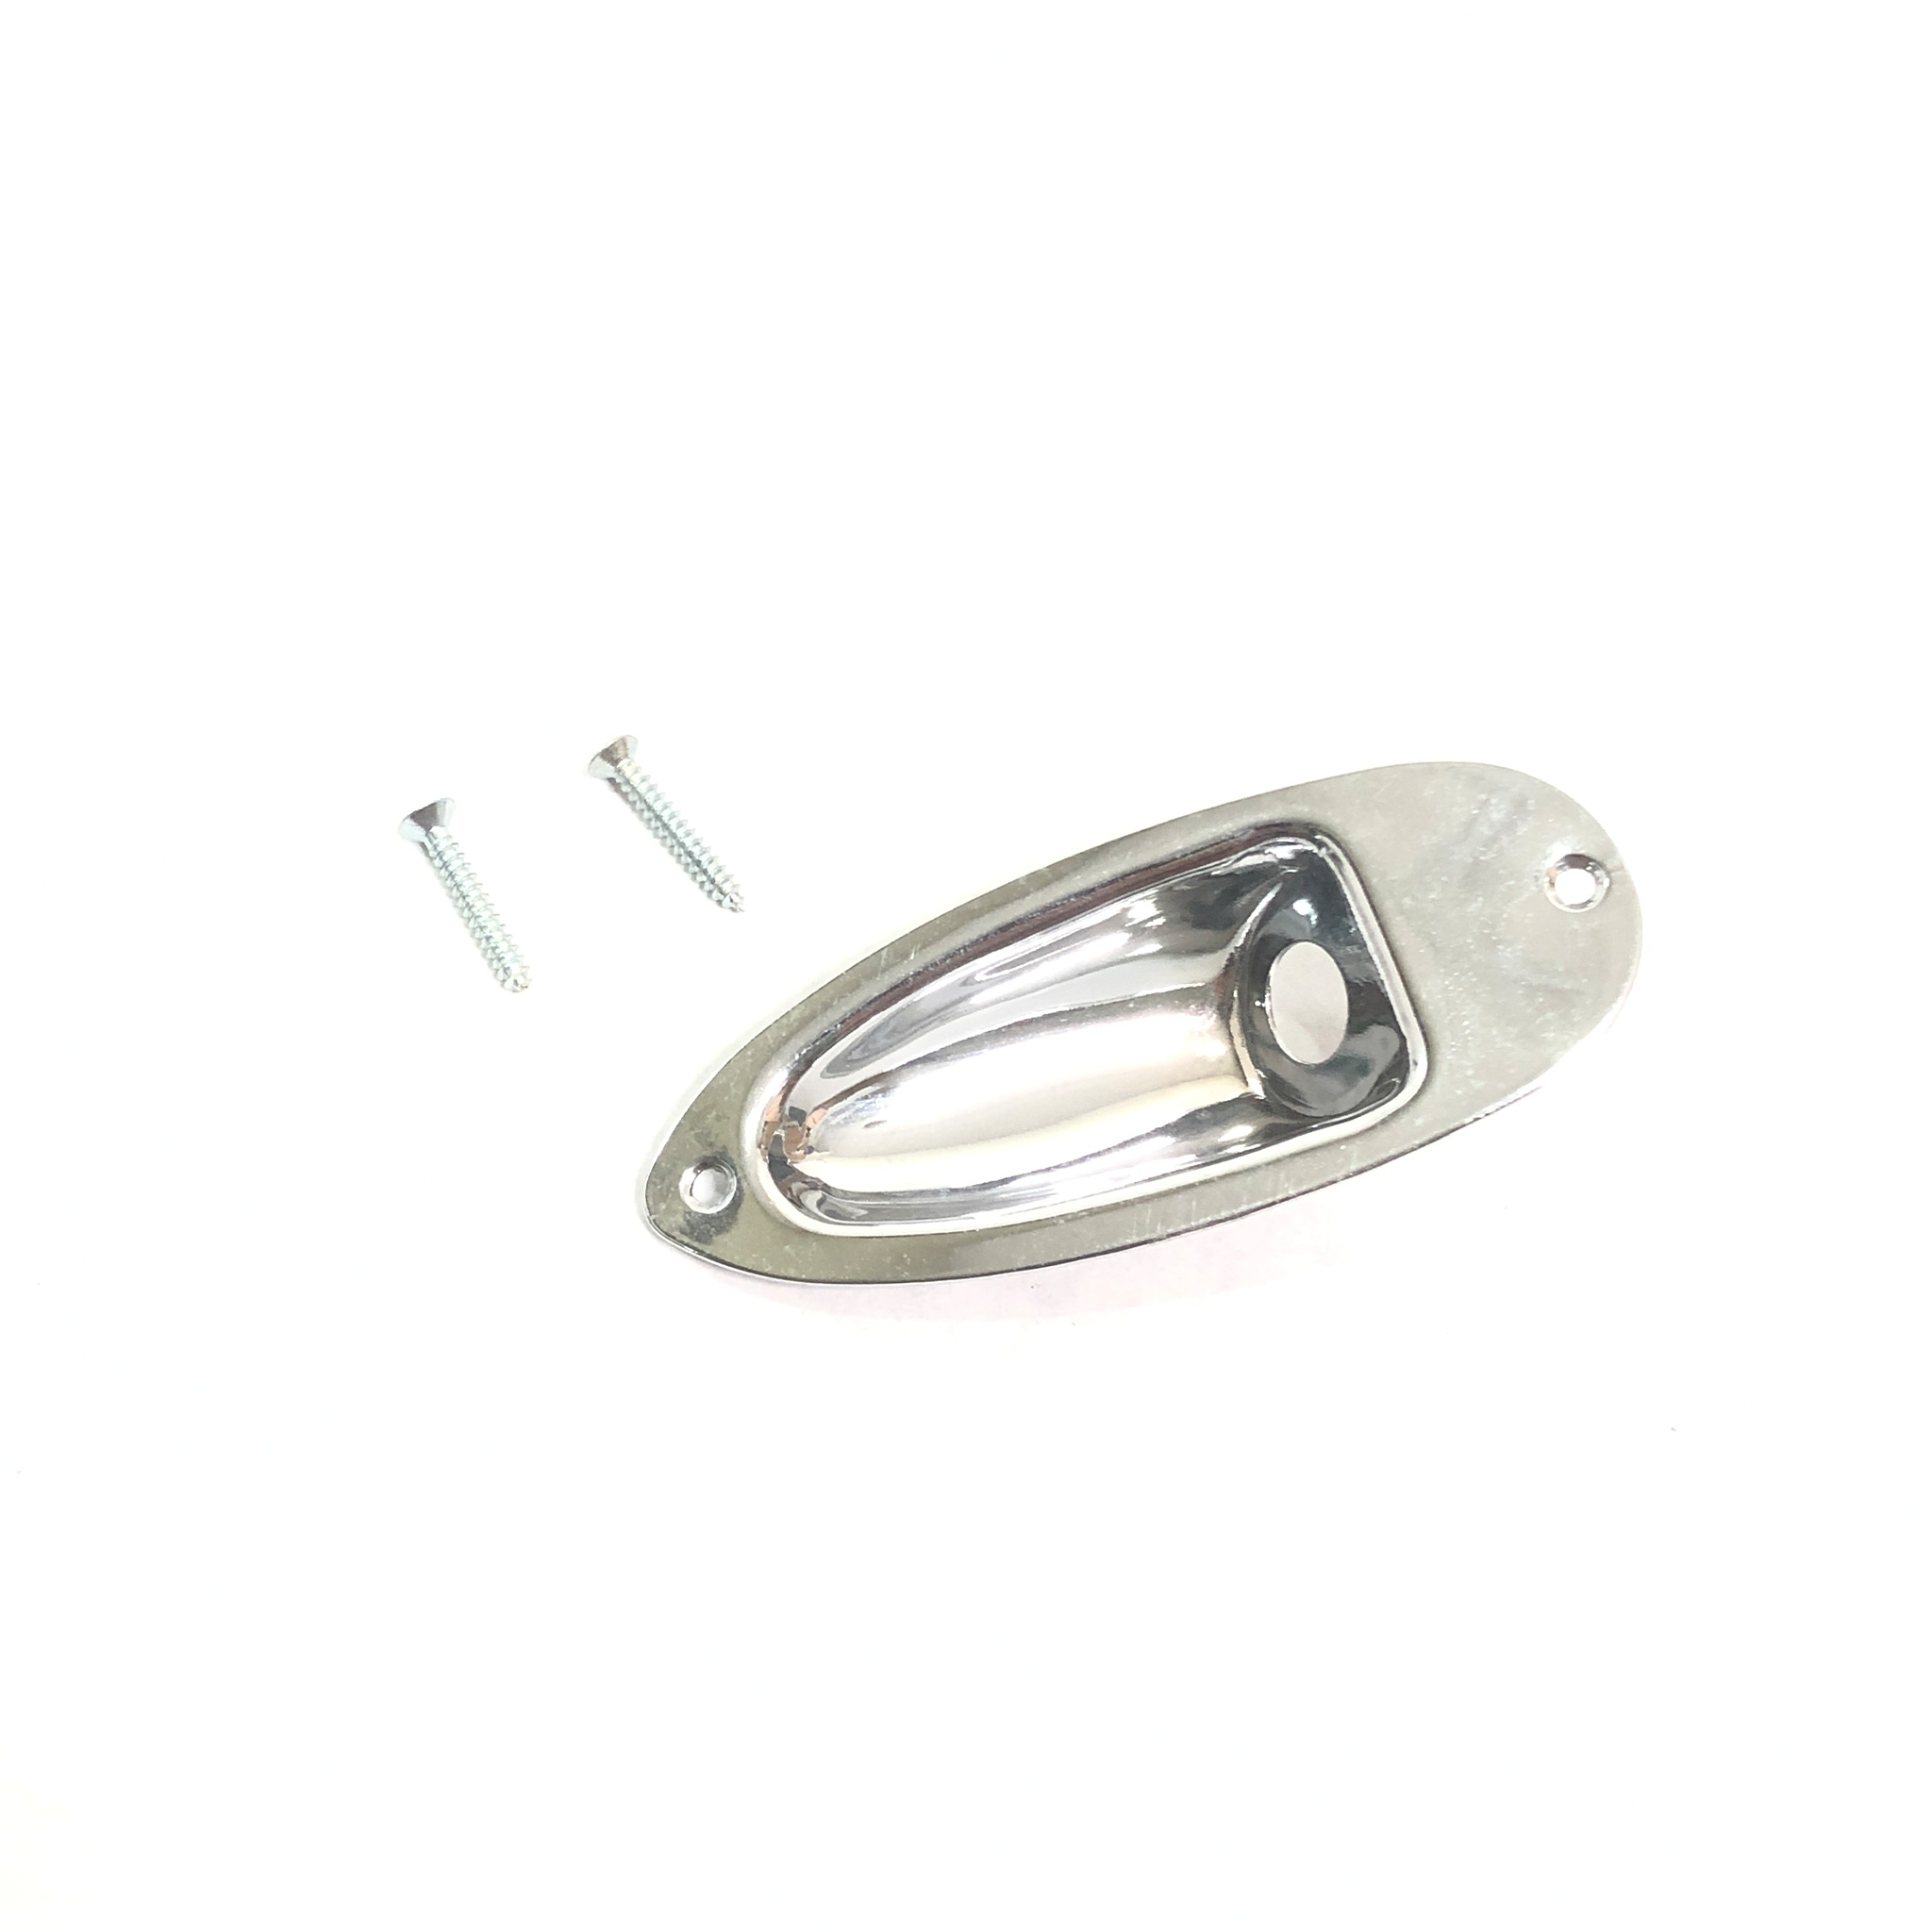 Lazer JP-1 B&C Stratocaster Chrome Oval Jack Plate for Electric Guitar